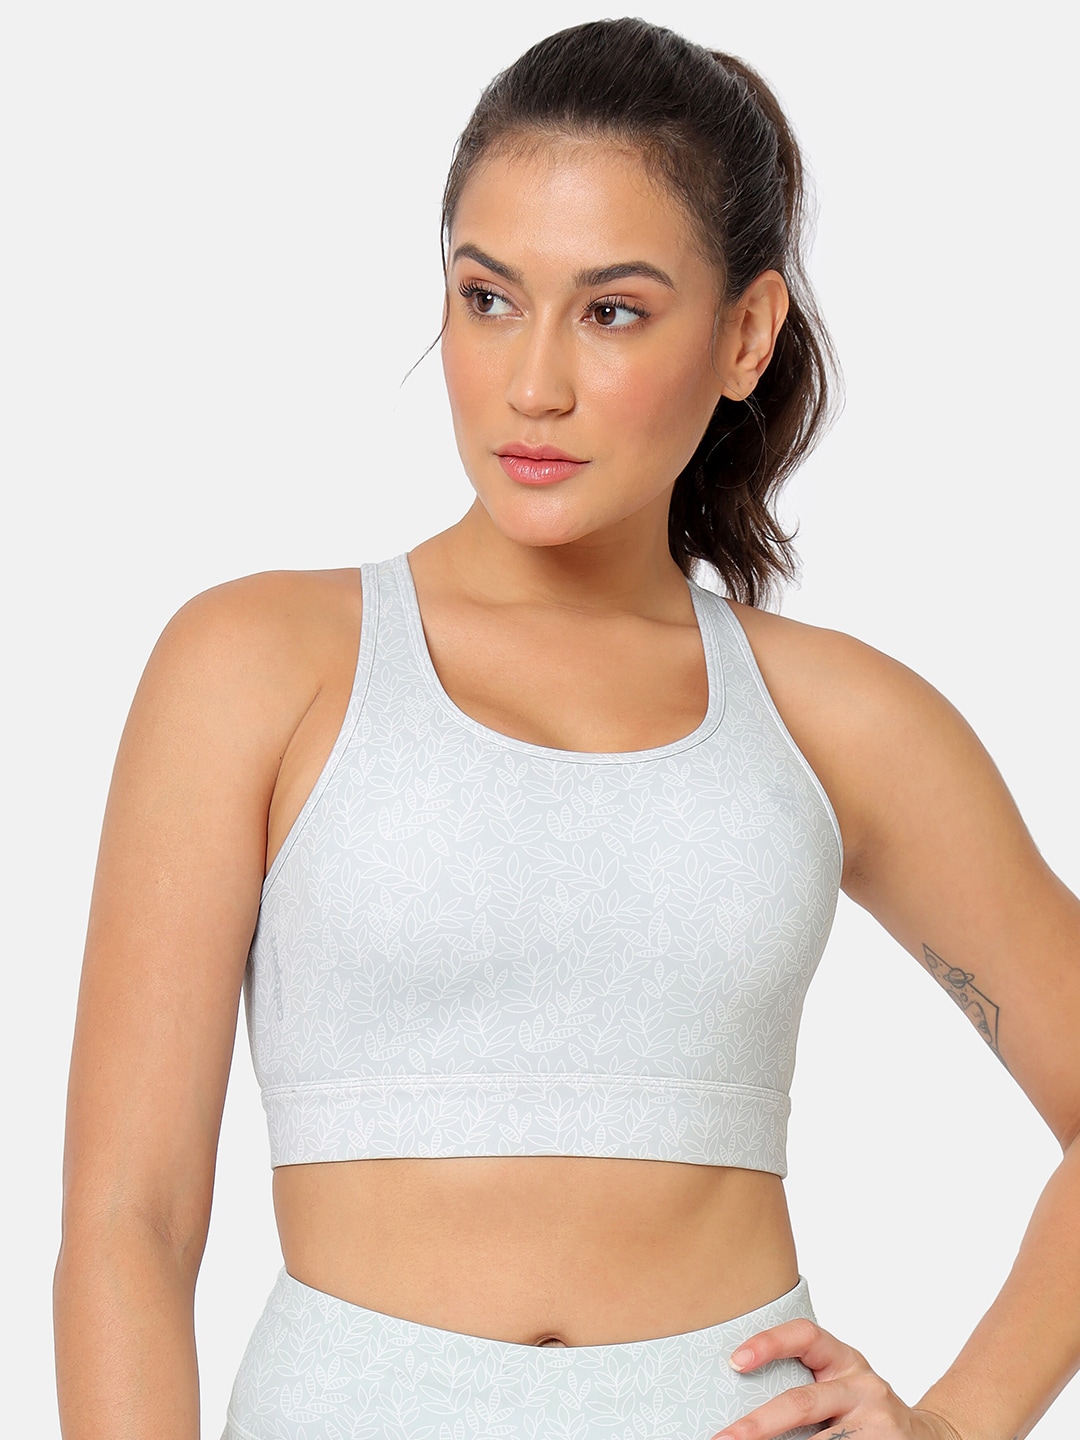 Cultsport Grey & White Floral Printed Removable-Padding & Non-Wired Sports Bra Price in India